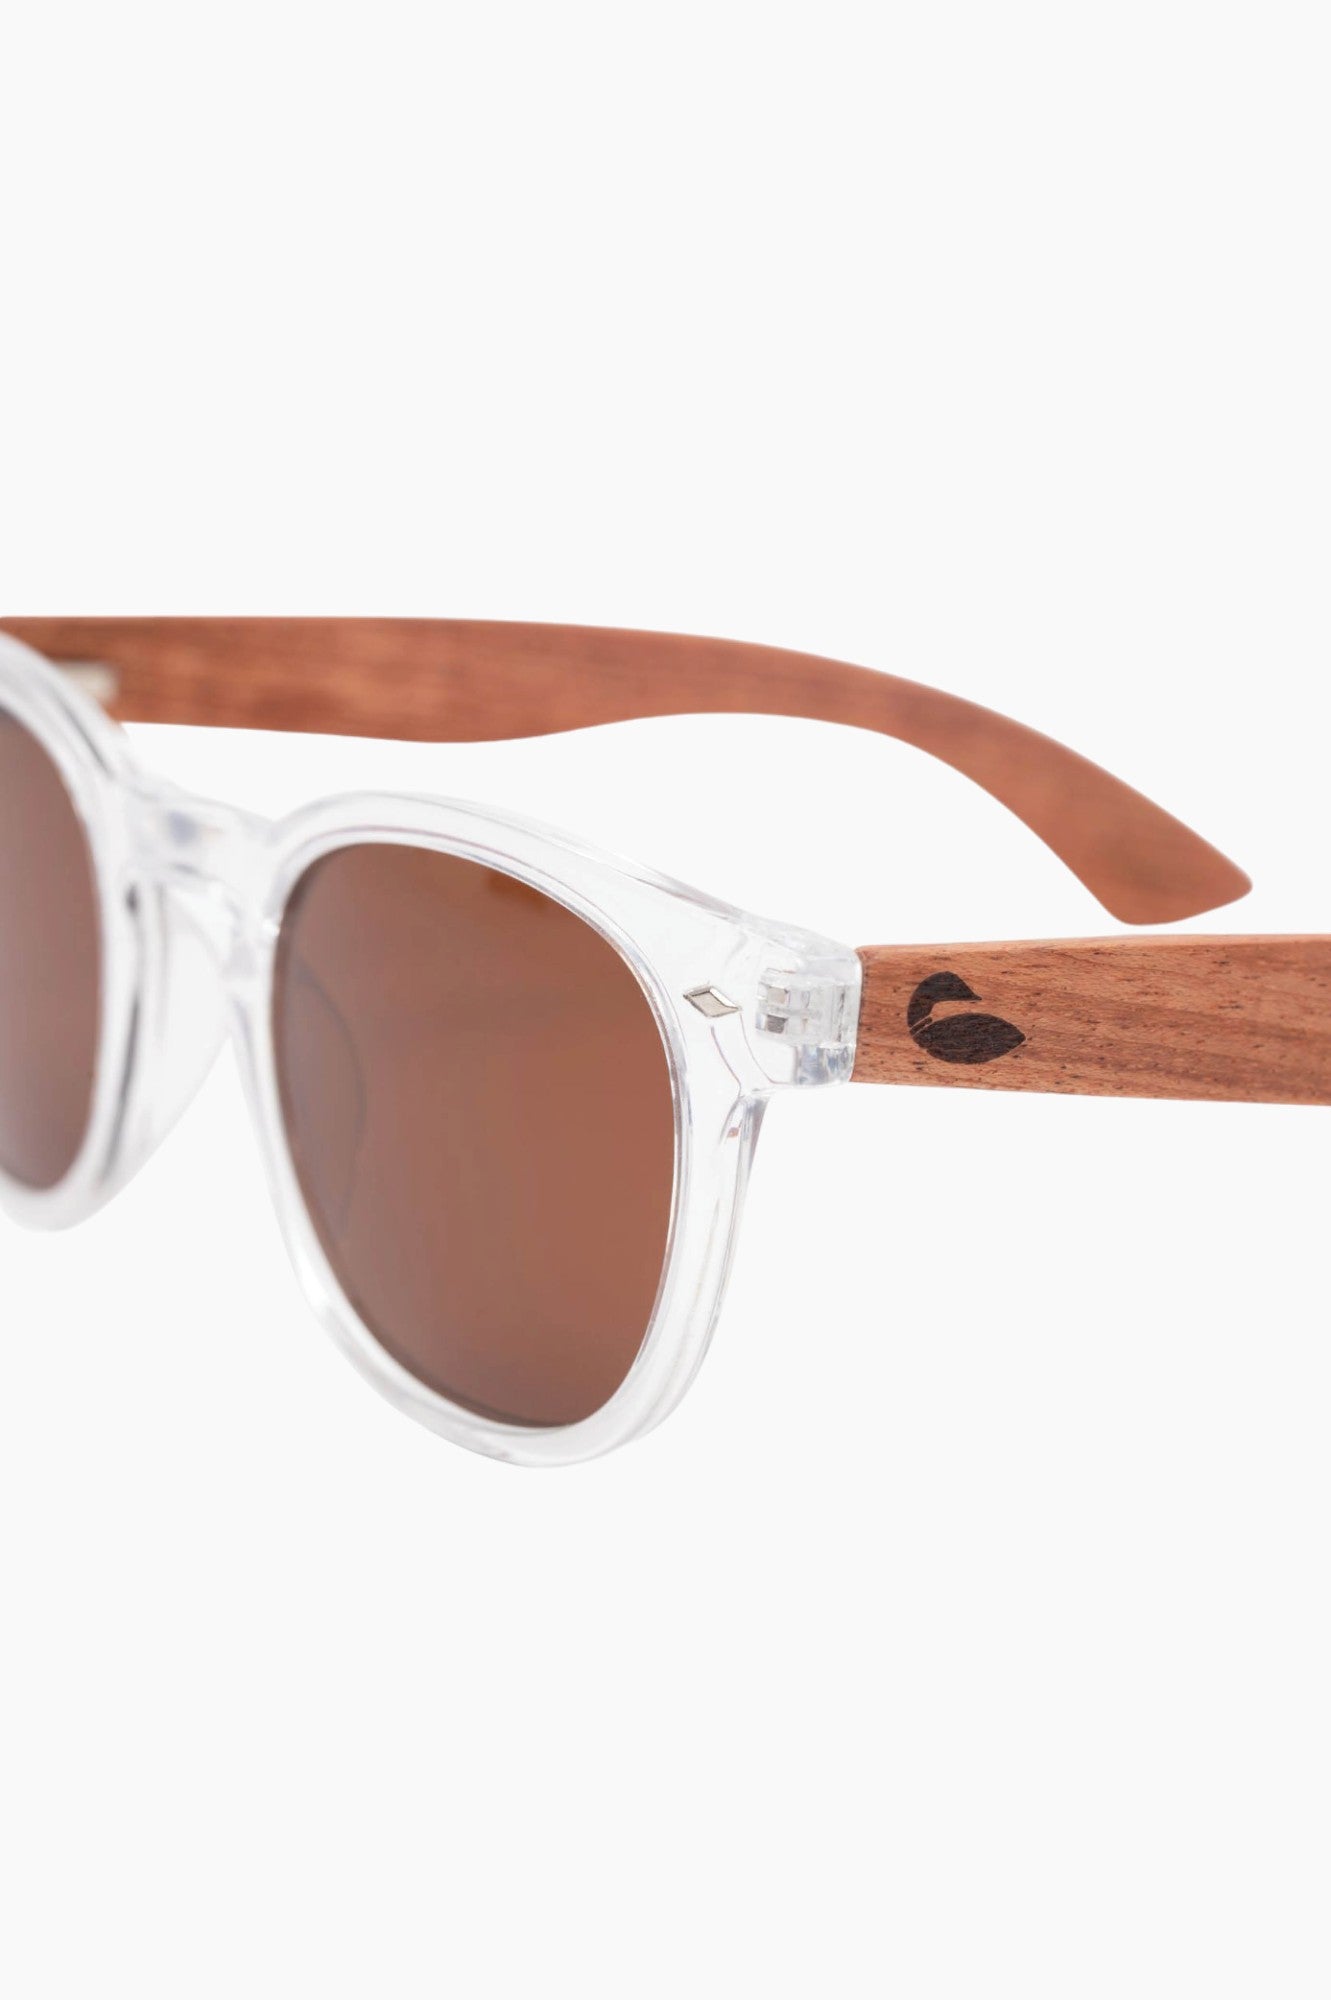 Clear sunglass frames with wood temple pieces with a loon on it.